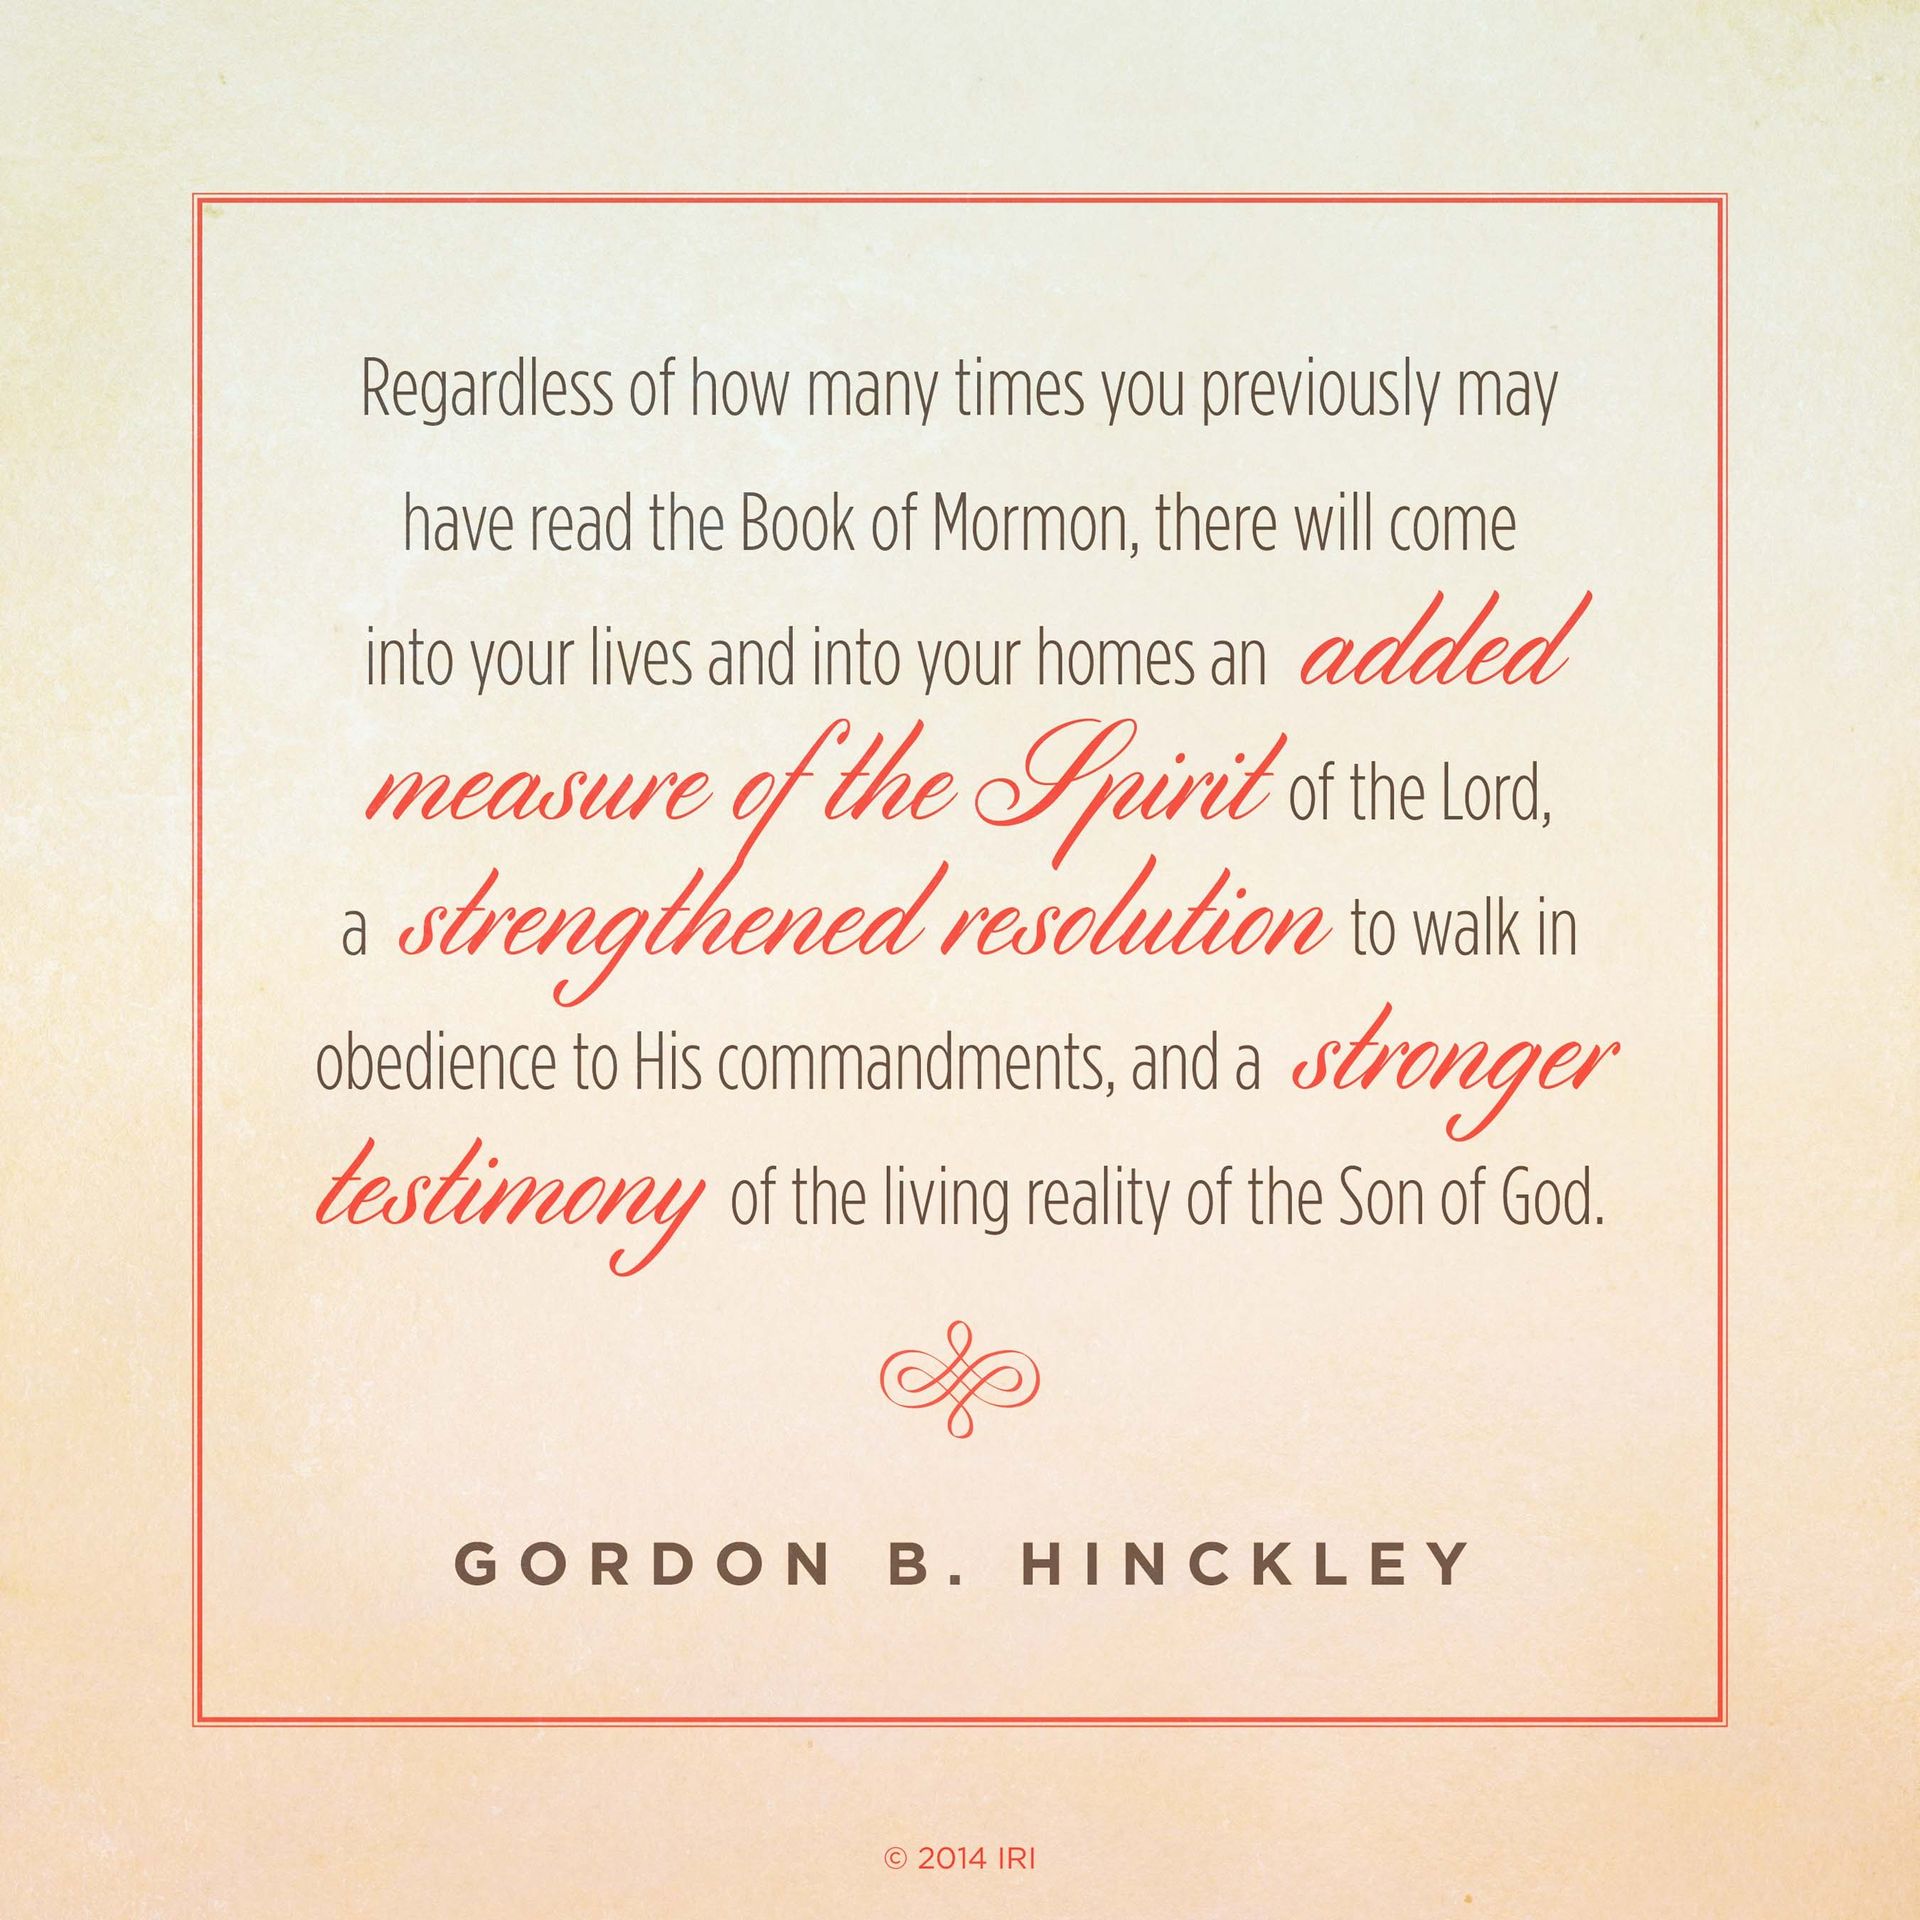 “Regardless of how many times you previously may have read the Book of Mormon, there will come into your lives and into your homes an added measure of the Spirit of the Lord, a strengthened resolution to walk in obedience to His commandments, and a stronger testimony of the living reality of the Son of God.”—President Gordon B. Hinckley, “A Testimony Vibrant and True”